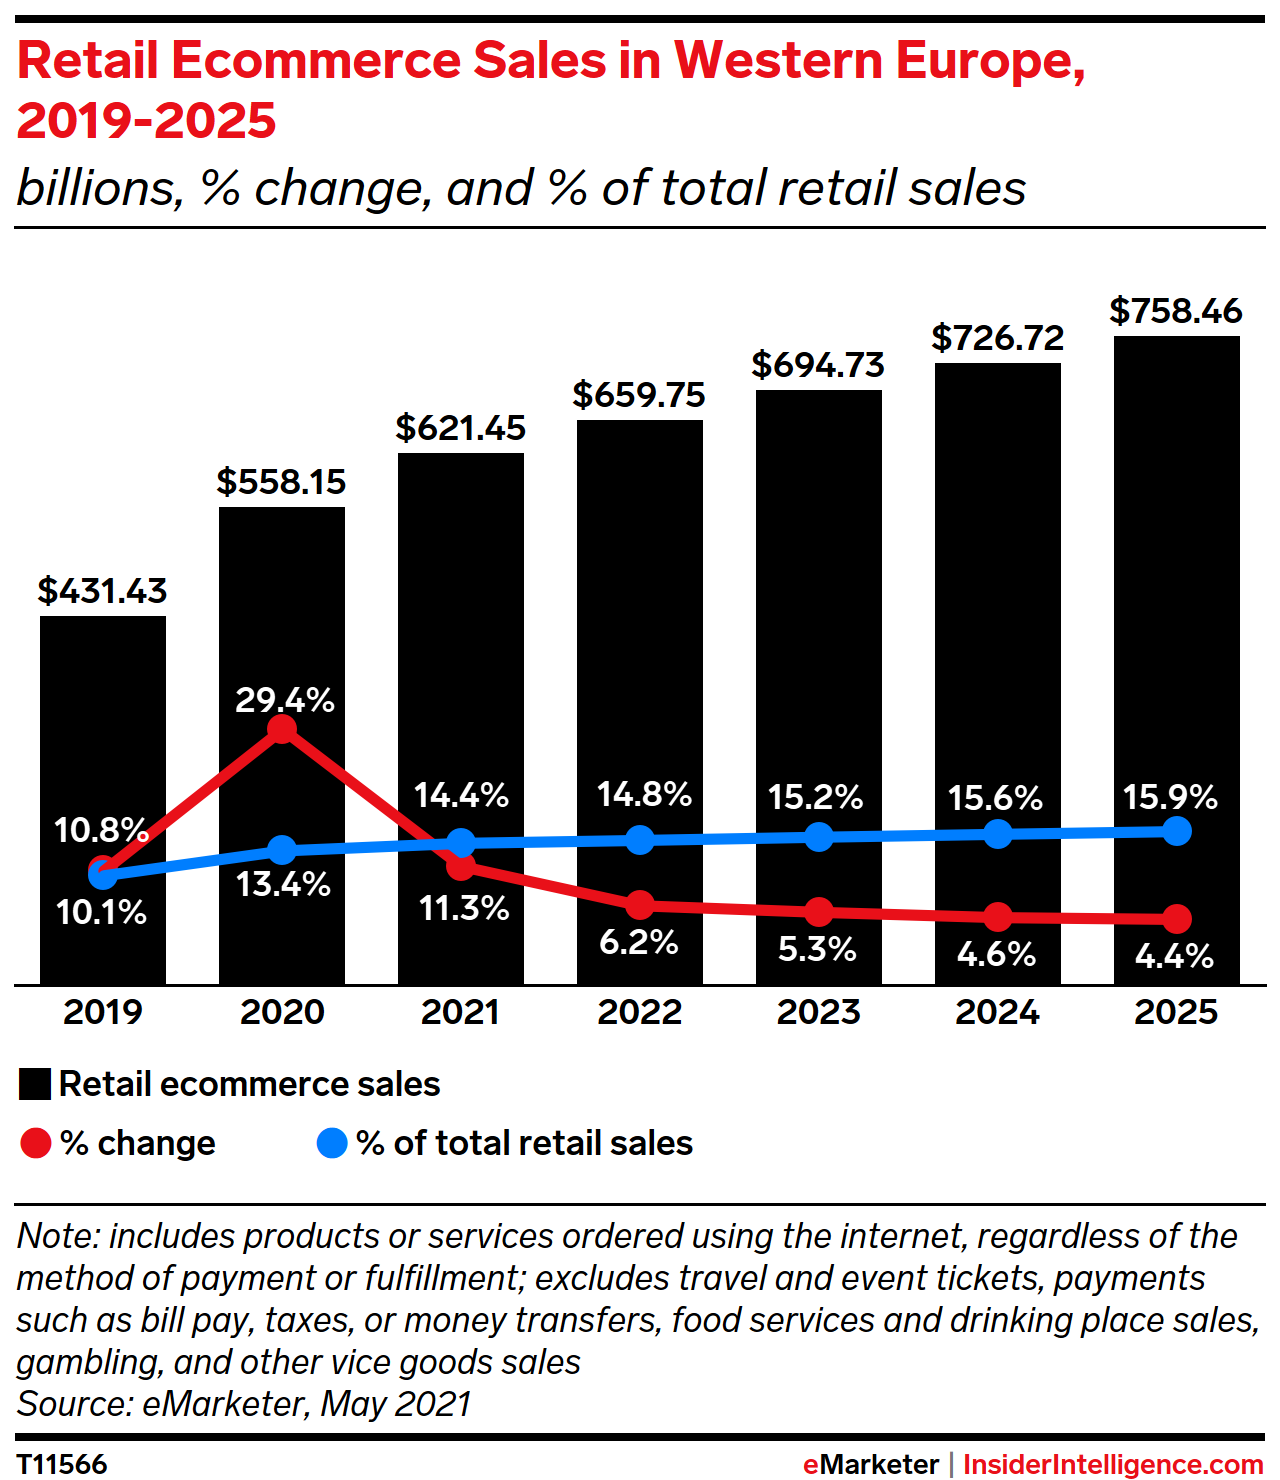 Retail Ecommerce Sales in Western Europe, 2019-2025 (billions, % change, and % of total retail sales)